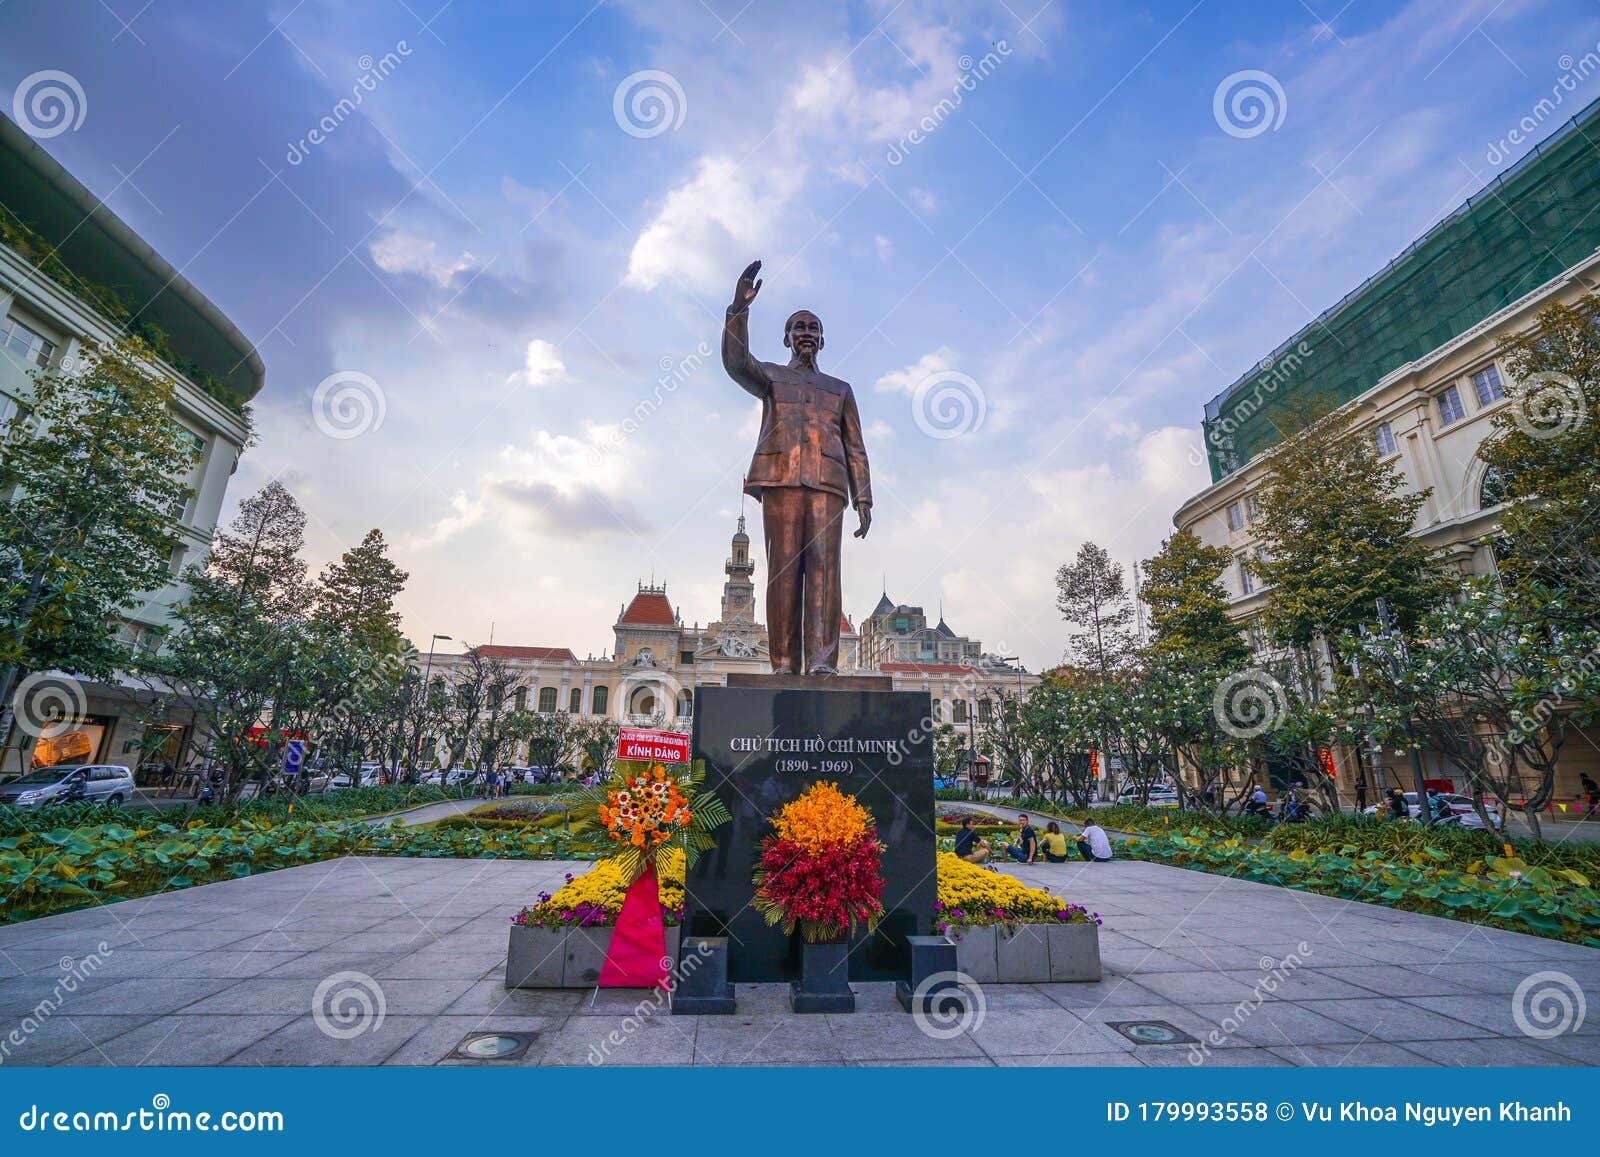 Nguyen Hue Street with Chi Minh Statue Have Been Renovated, Located in 1, Point of City Life, a Pedestrian Mall, Editorial Stock Photo - Image of cloudy,